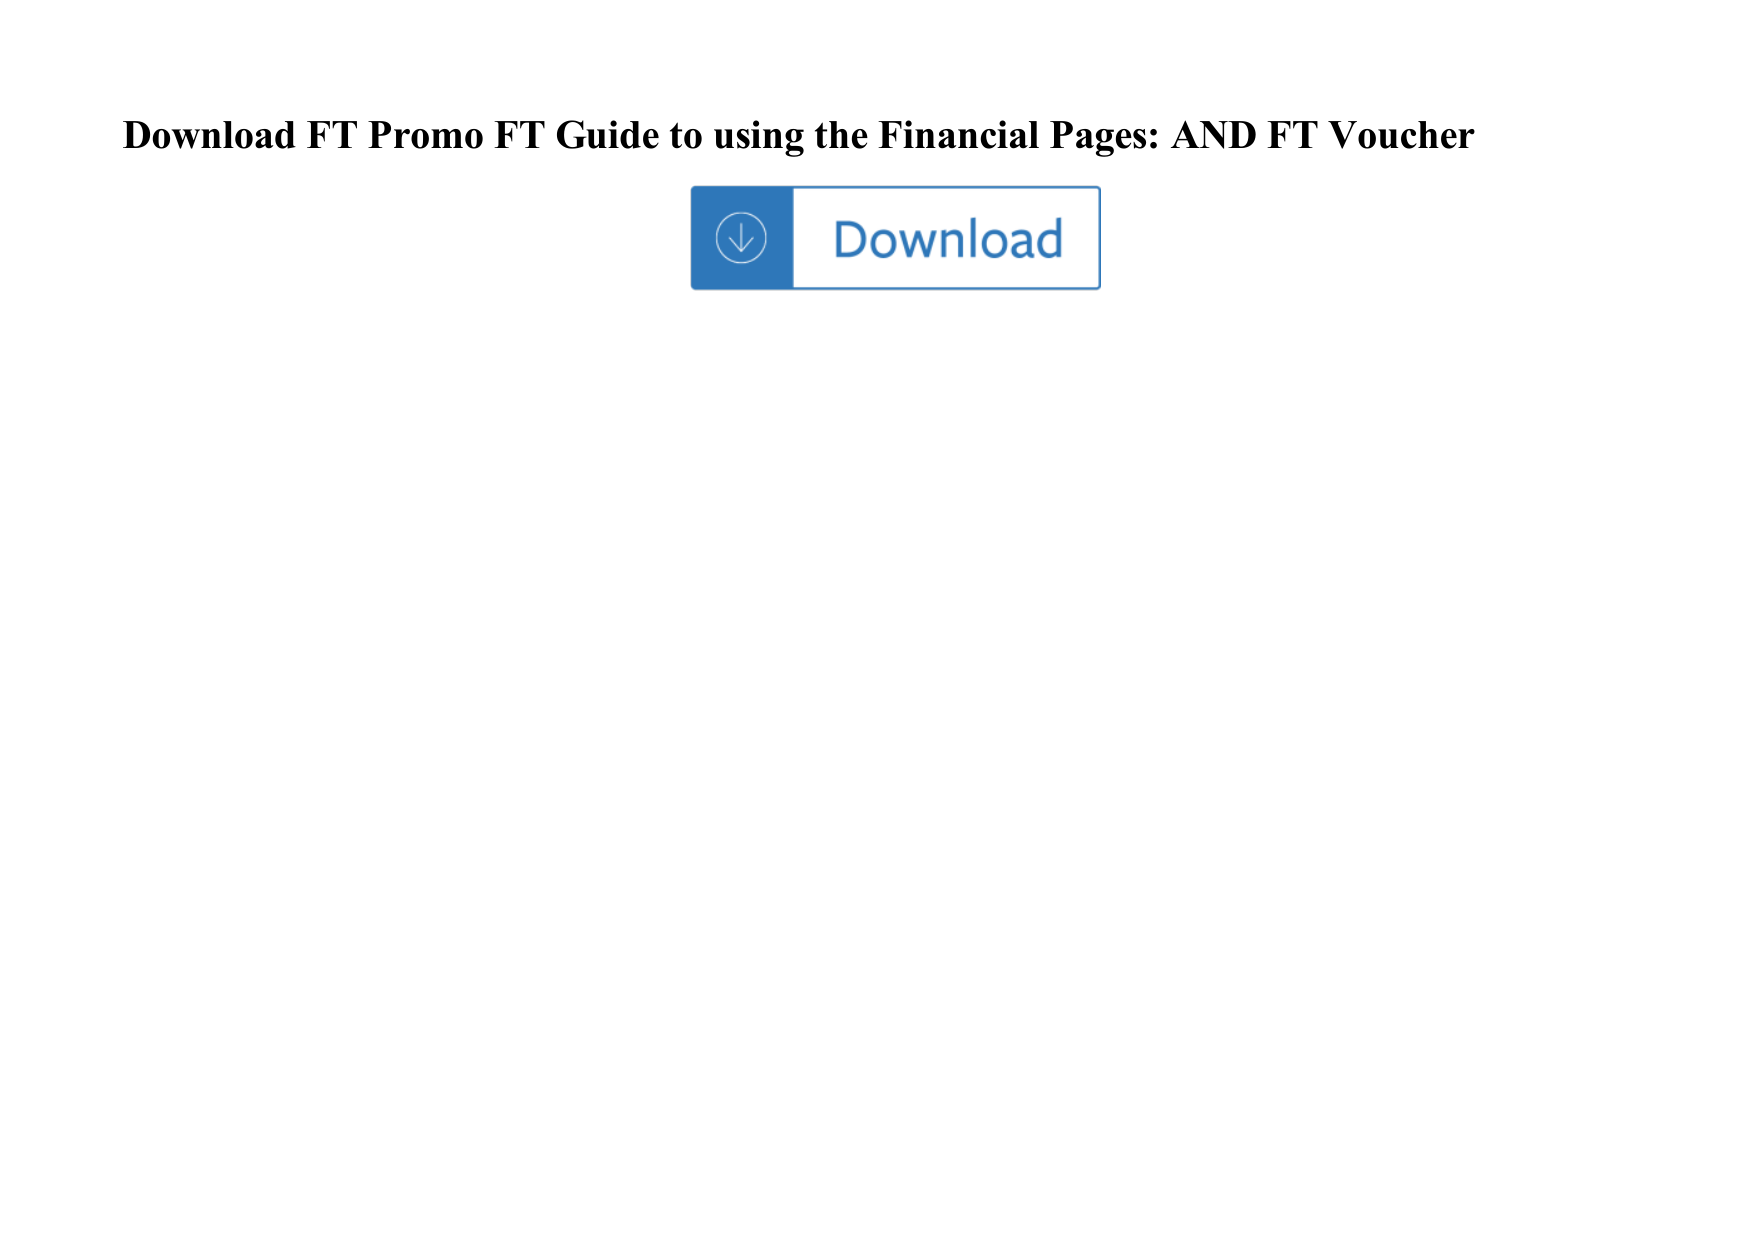 Page 1 of 2 - FT Promo Guide To Using The Financial Pages: AND Voucher Ft-promo-ft-guide-to-using-the-financial-pages-and-ft-voucher